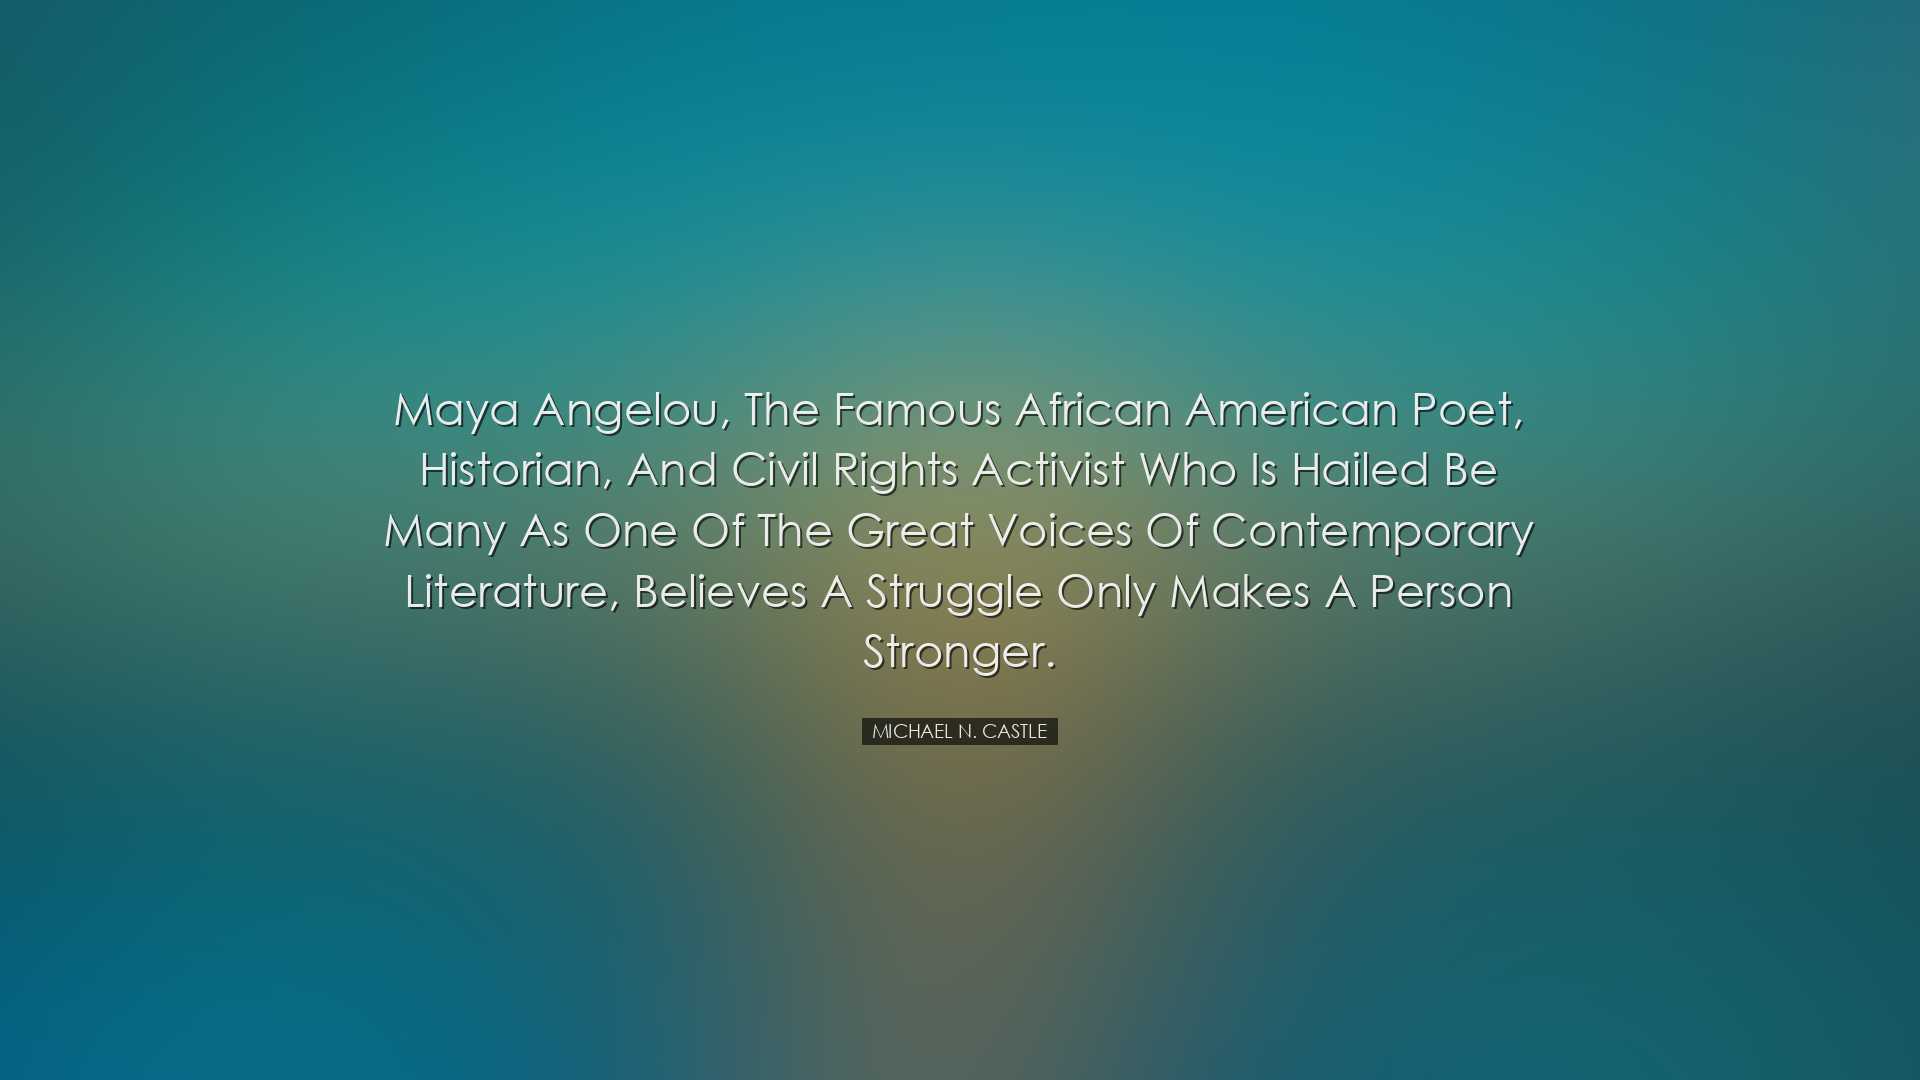 Maya Angelou, the famous African American poet, historian, and civ